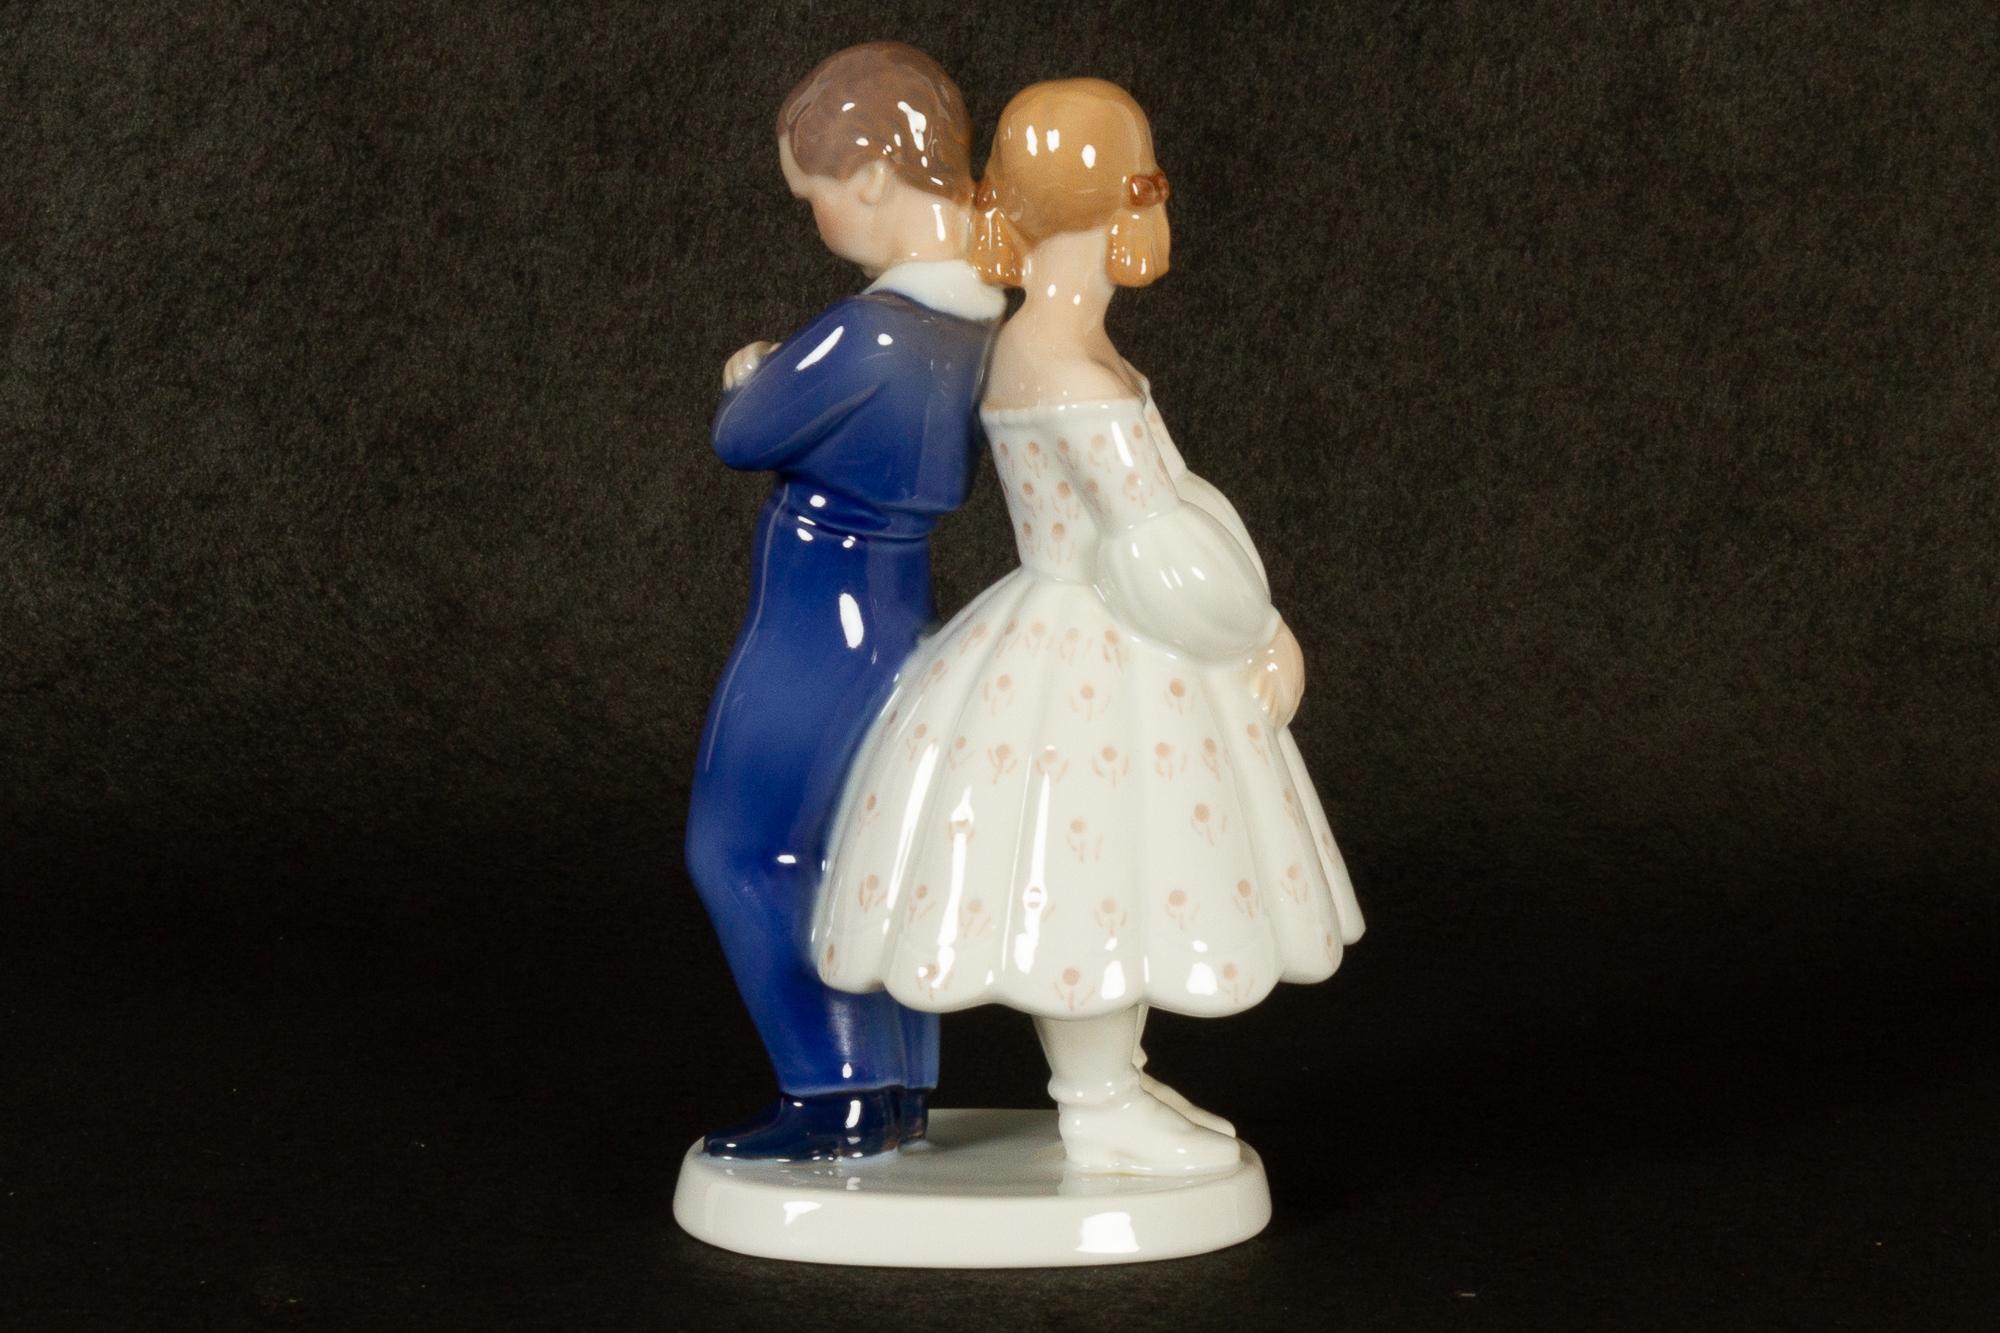 Vintage Danish Porcelain figurine by Claire Weiss for Bing & Grøndahl 1970s.
Hand painted porcelain figurine of a young couple designed by Claire Weiss and made by Danish manufacturer Bing & Grøndahl in Copenhagen.
Very good condition. 1. Factory